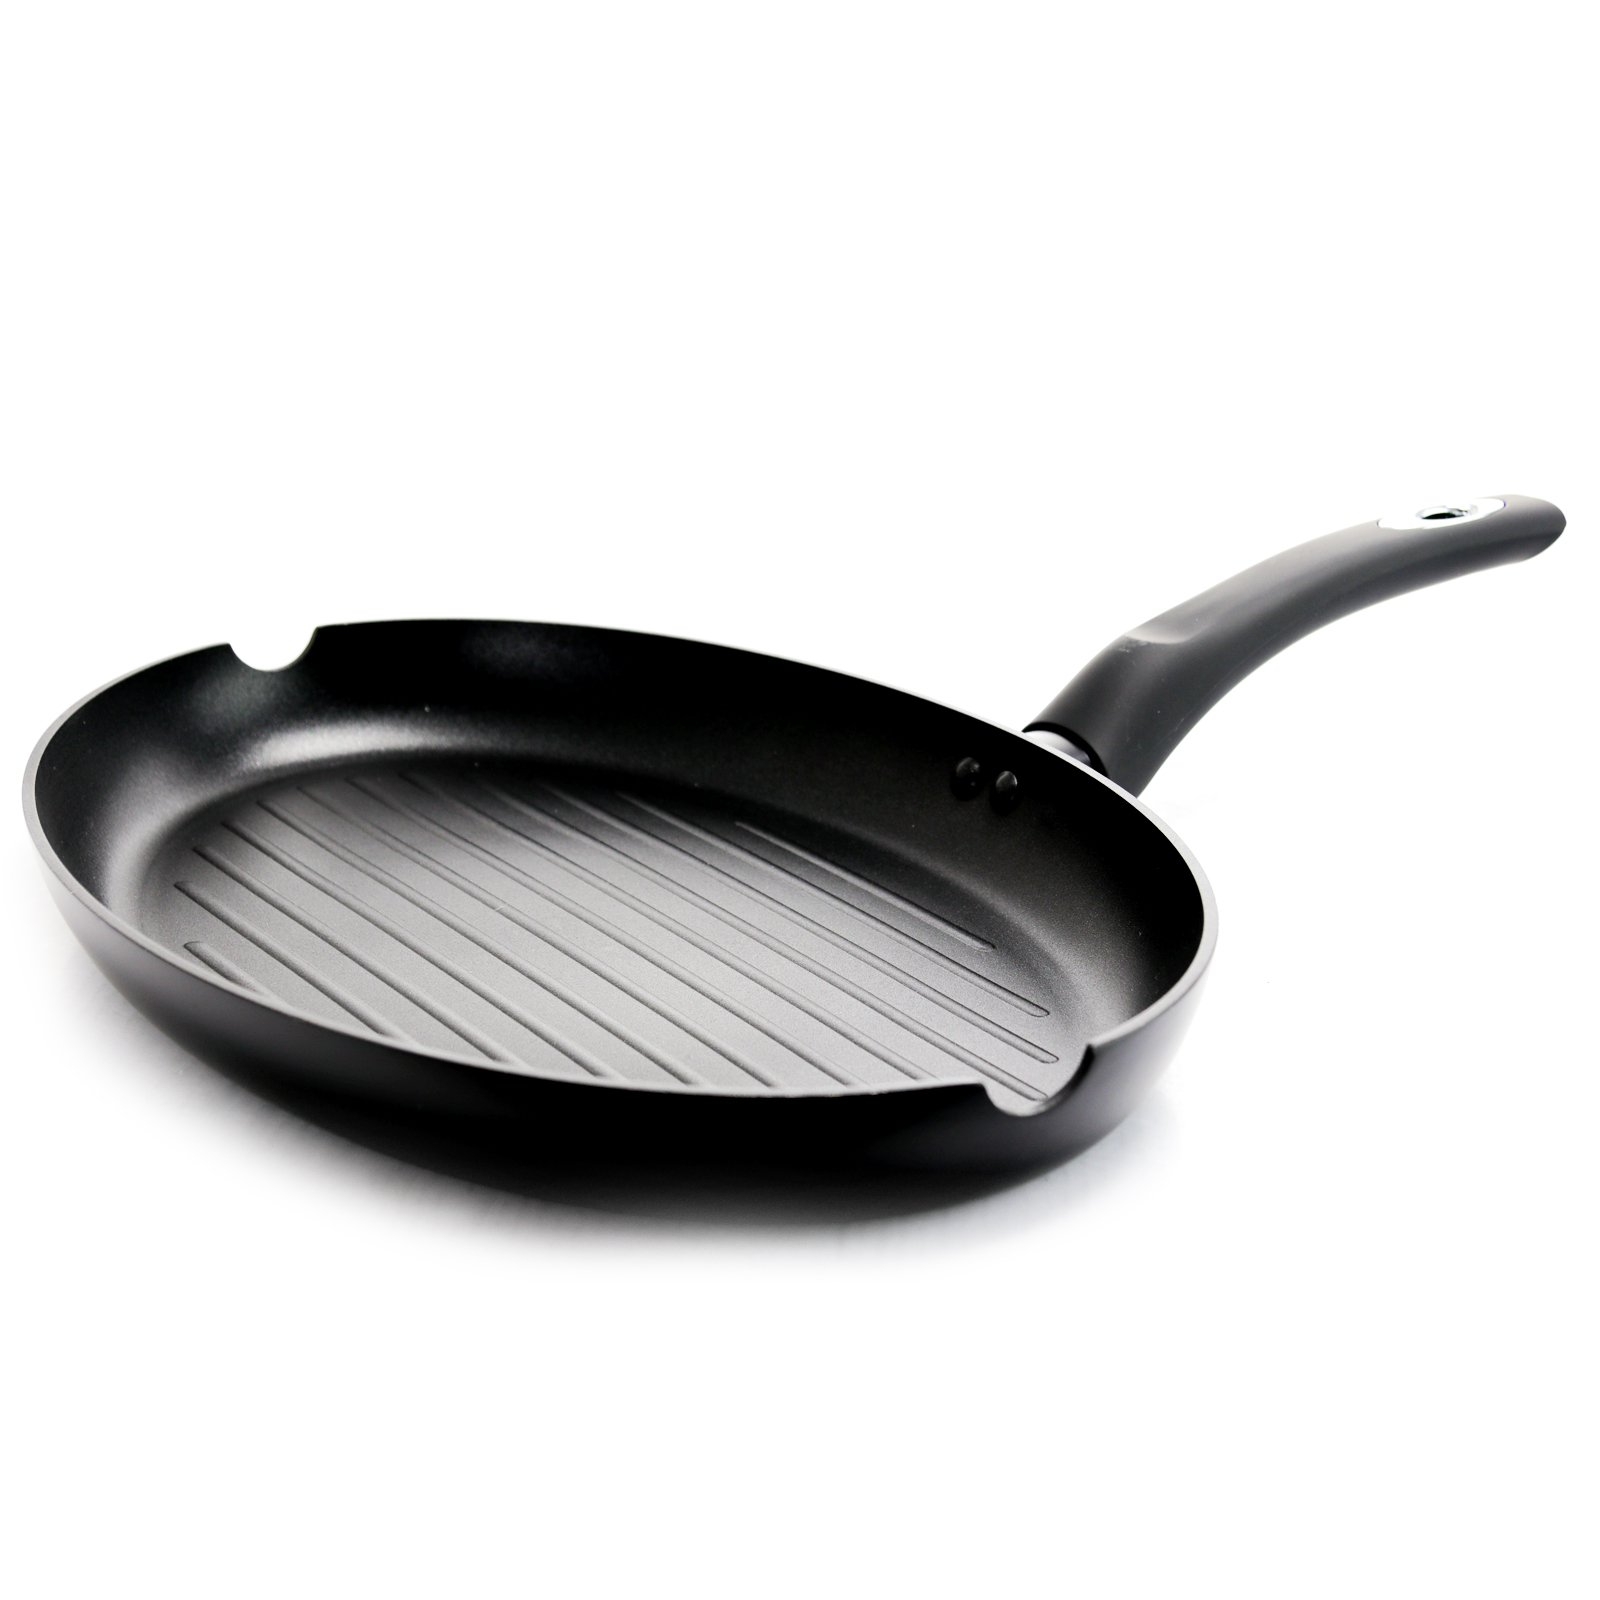 Oster Allston 13" Grill Pan - Oval - Black - Nonstick - Black Heat Resistant Handle - TPR Coating - Aluminum - 3.0 mm -  Color Sleeve